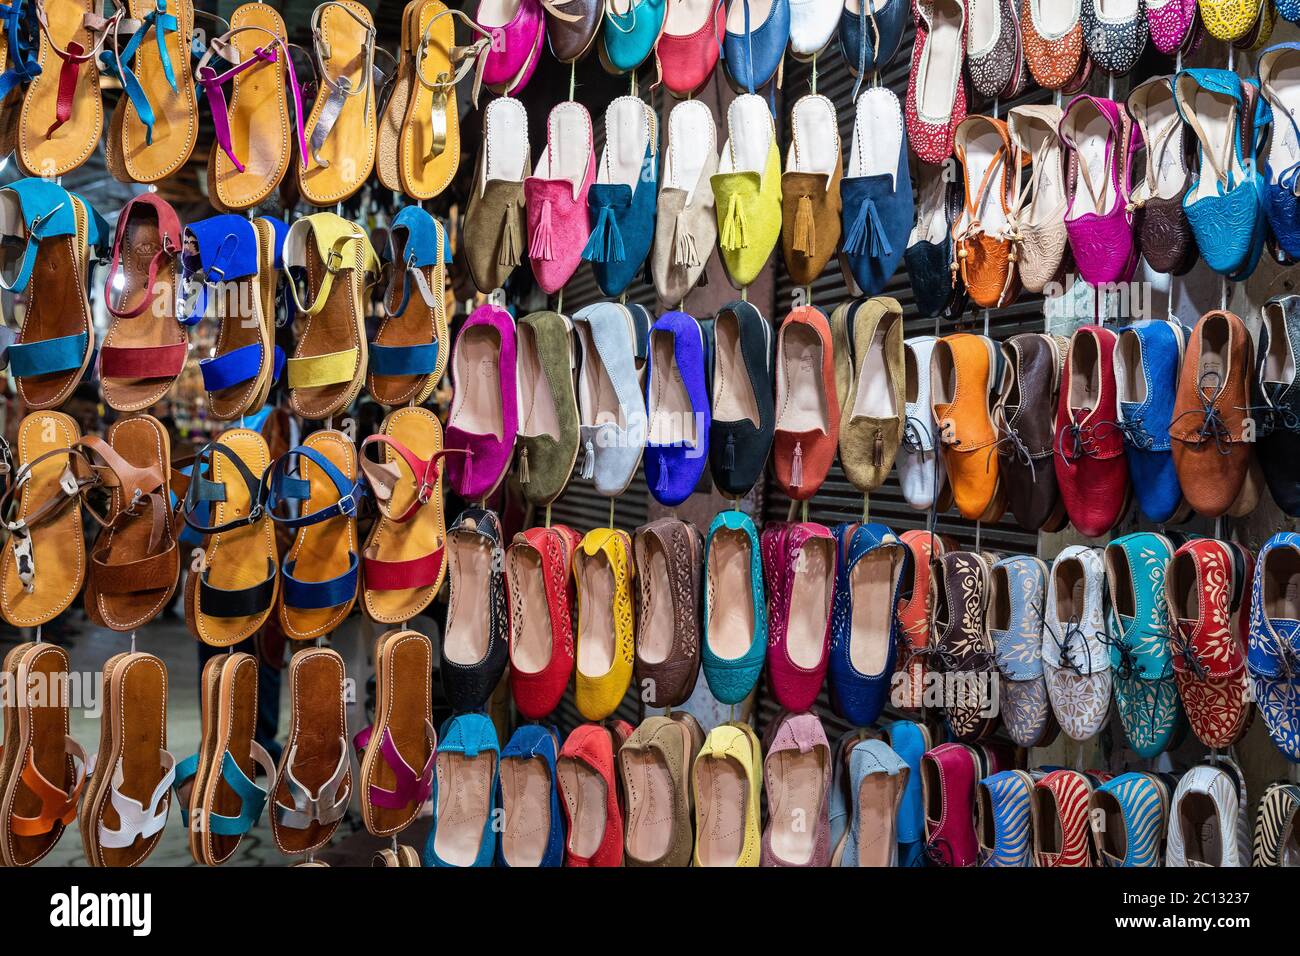 MOROCCO MARRAKECH JEMAA EL FNA MEDINA SOUK ASSORTMENT OF MULTICOLOURED LEATHER SHOES, SLIPPERS OR BABOUCHE FOR SALE Stock Photo